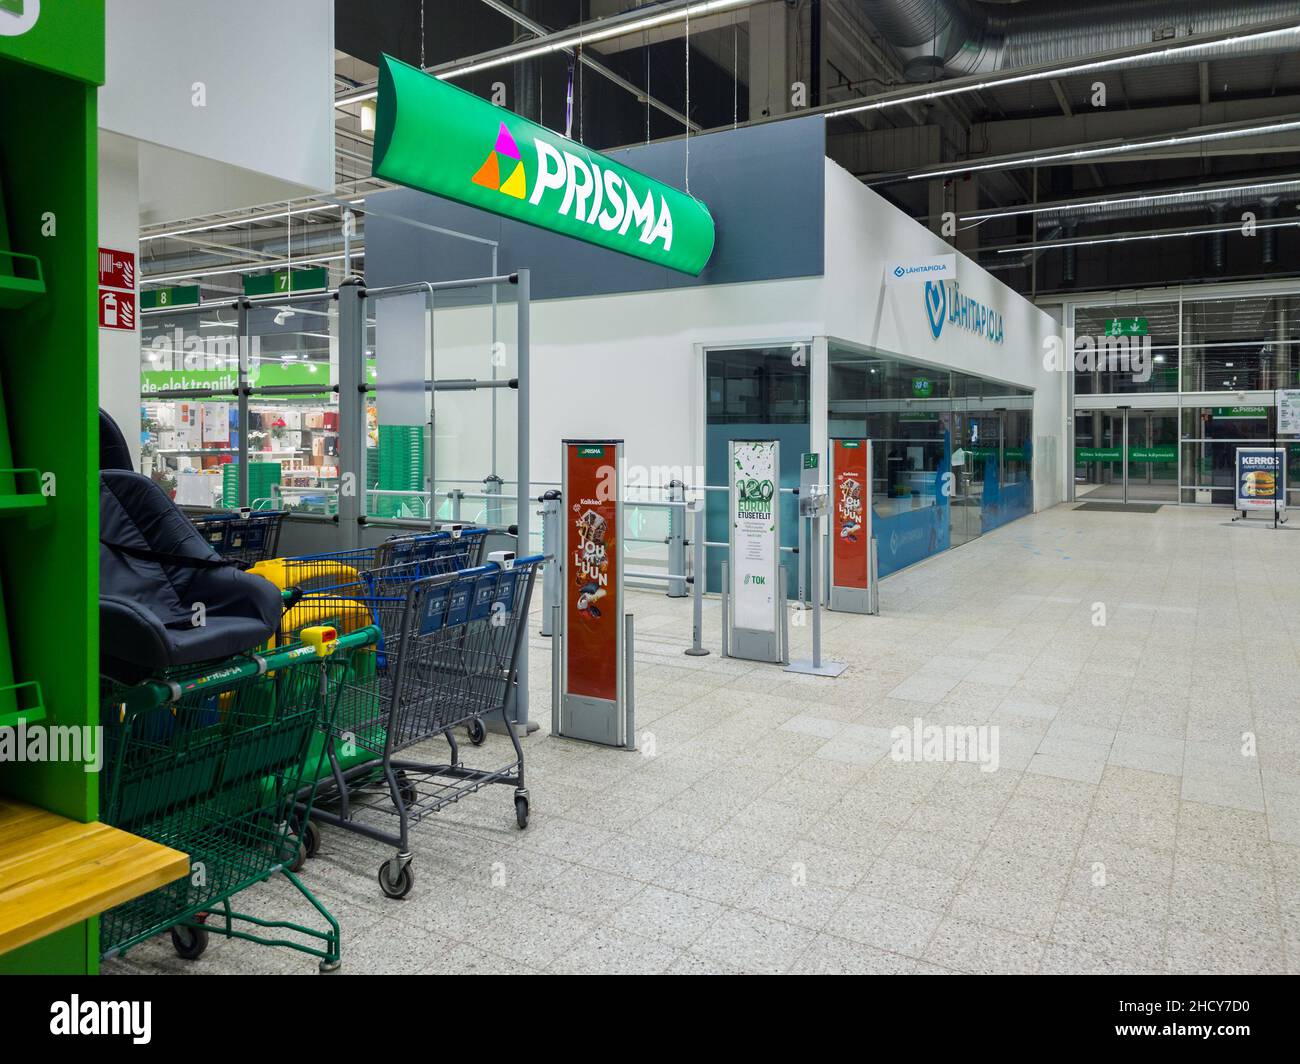 Turku, Finland - December 21, 2021: Vertical View of Prisma Grocery Store  Entrance Stock Photo - Alamy